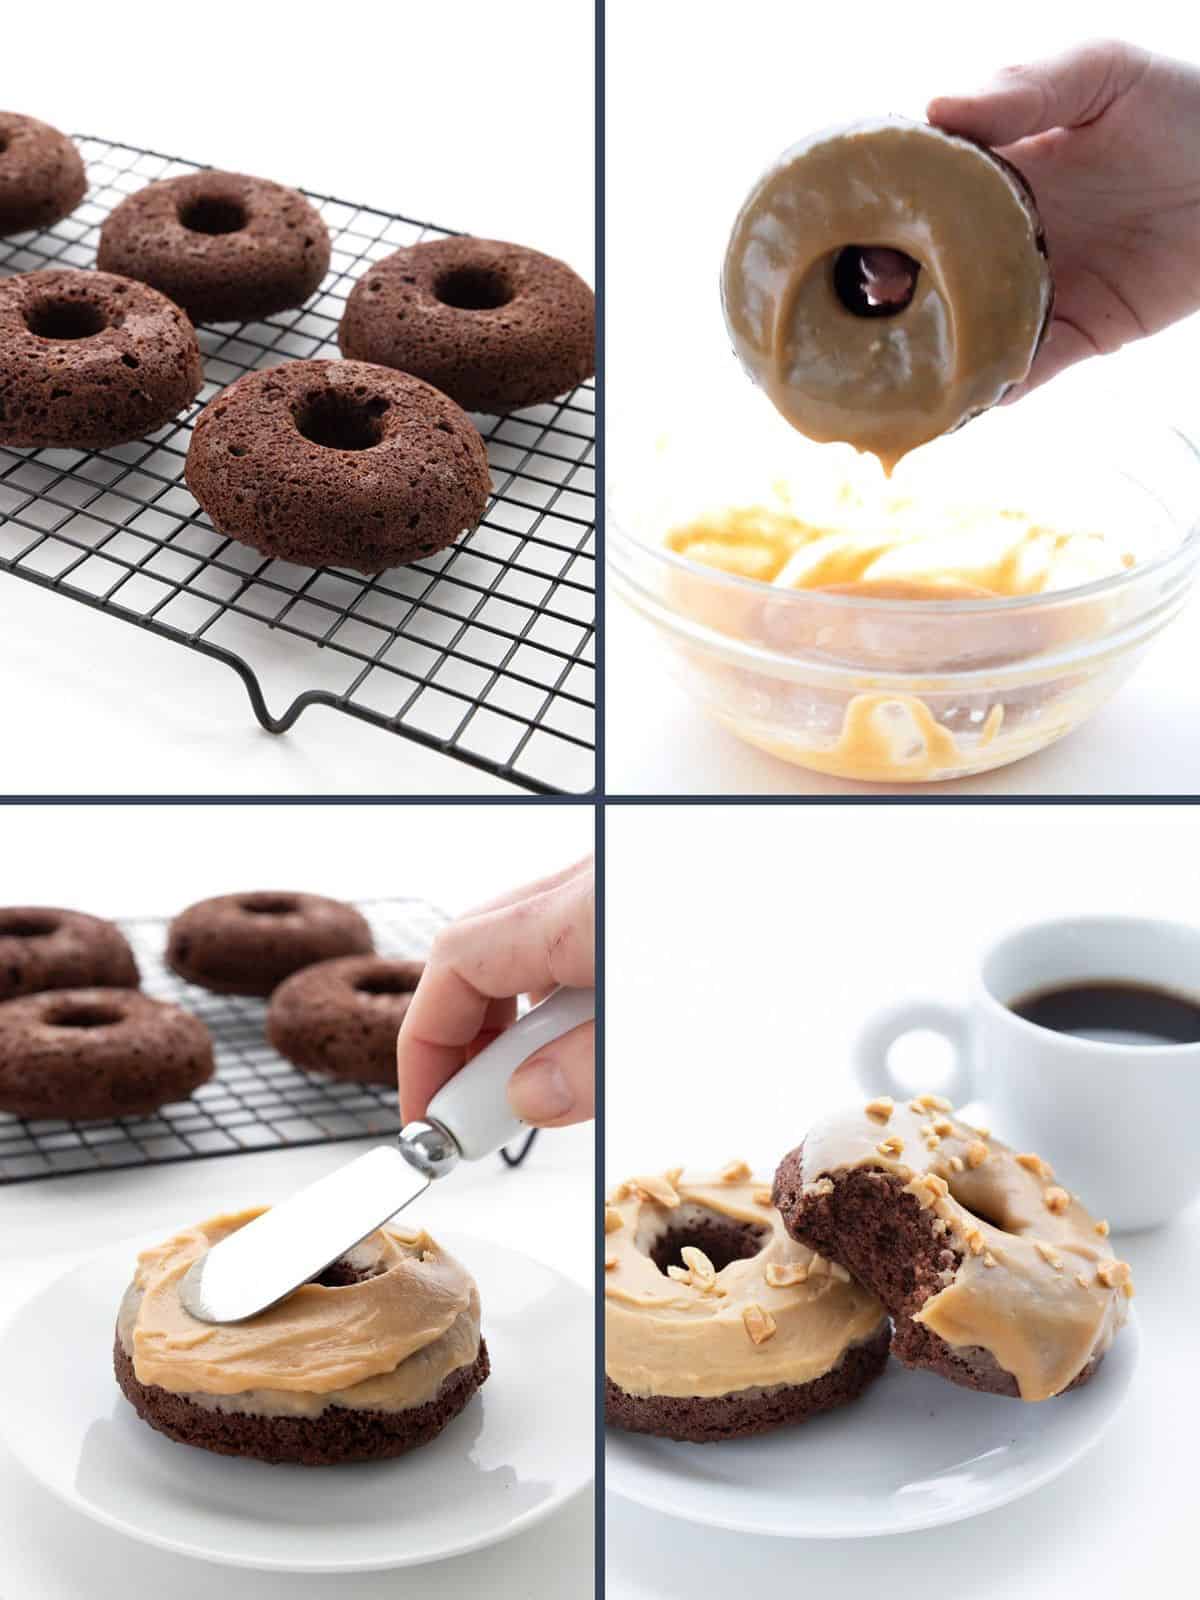 Four images showing how to make Keto Chocolate Peanut Butter Donuts.